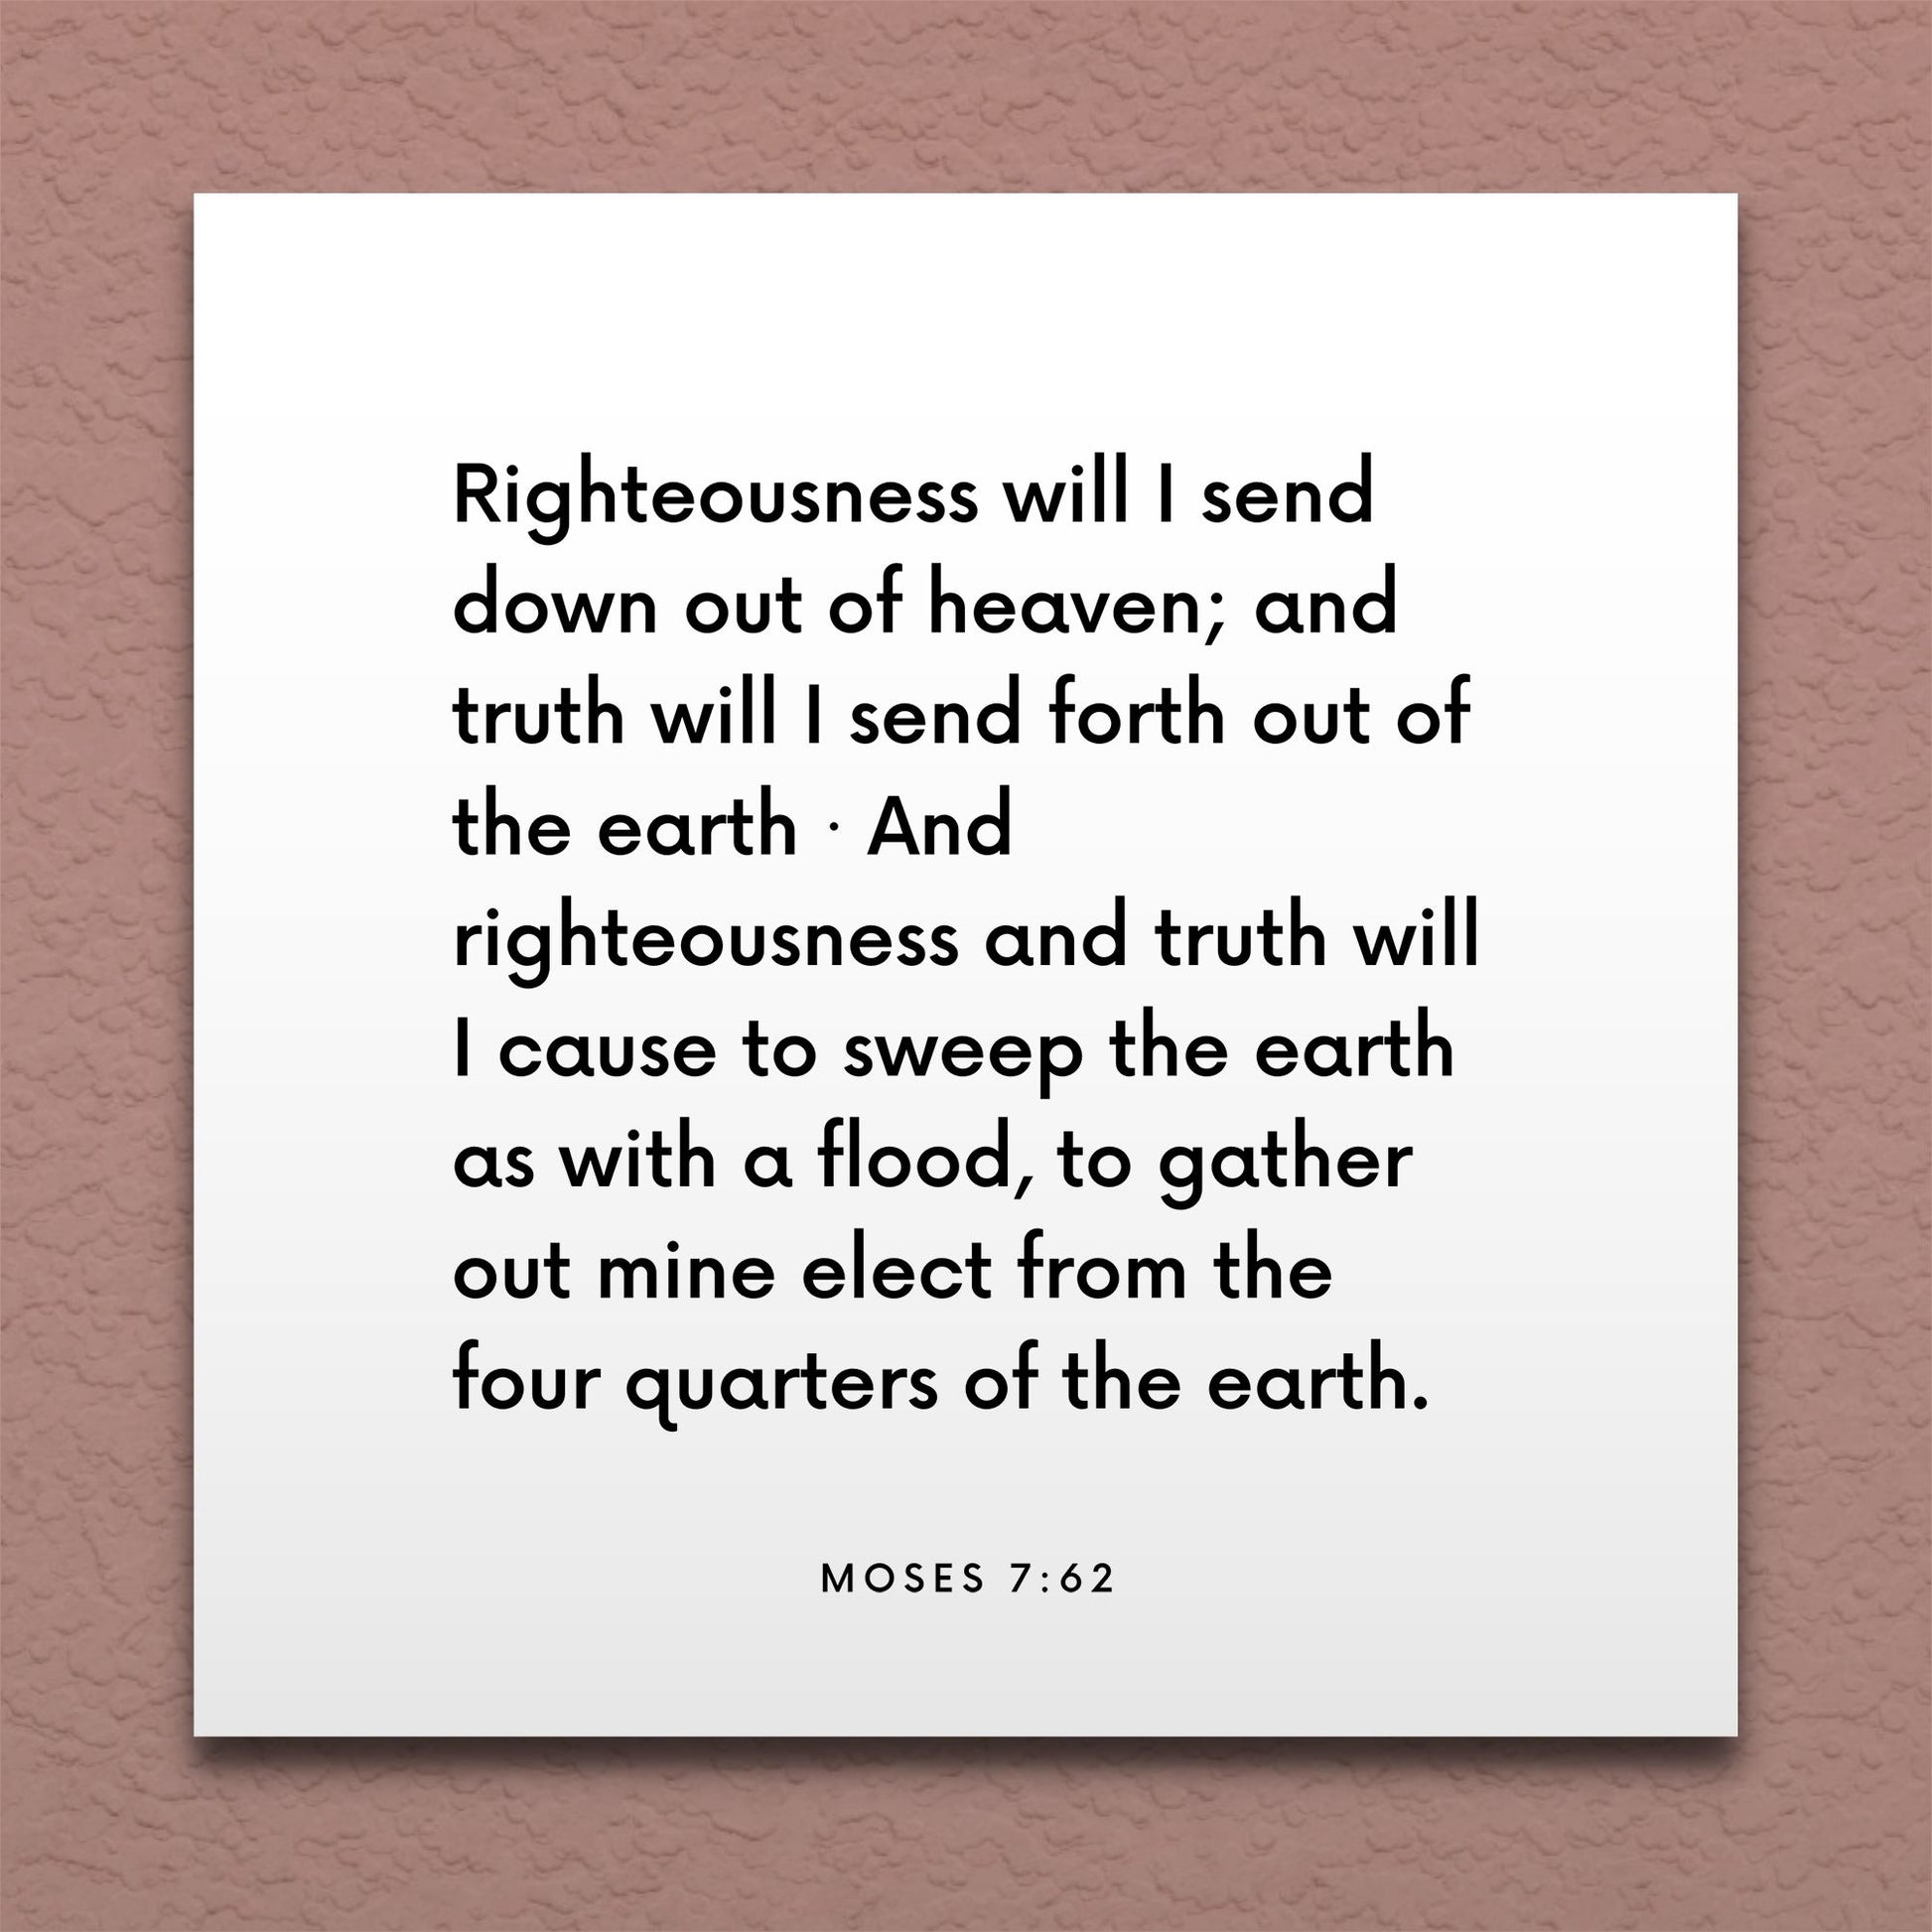 Wall-mounted scripture tile for Moses 7:62 - "Righteousness will I send down out of heaven"